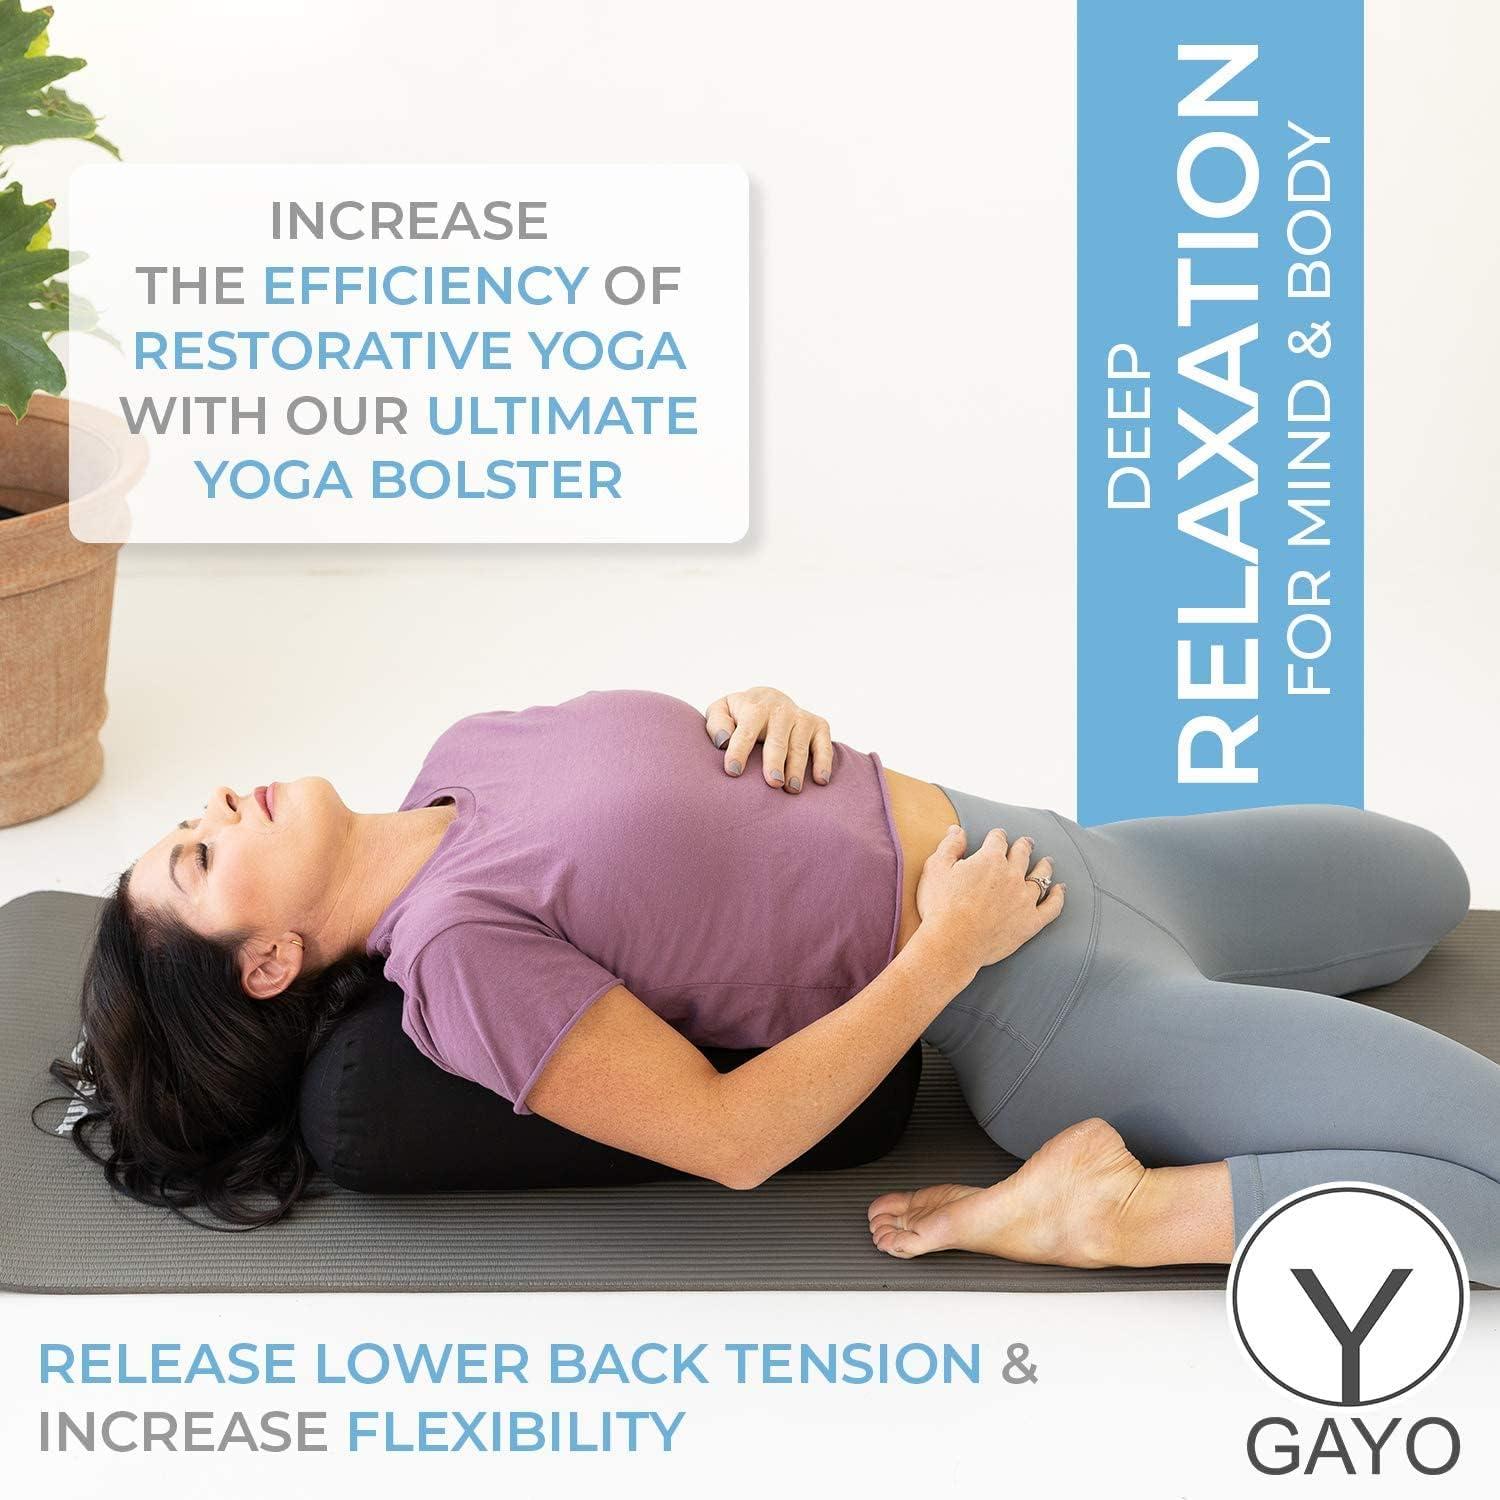 Restorative Yin Yoga With A Bolster: 53 Minute Class To Relax & Release -  YouTube